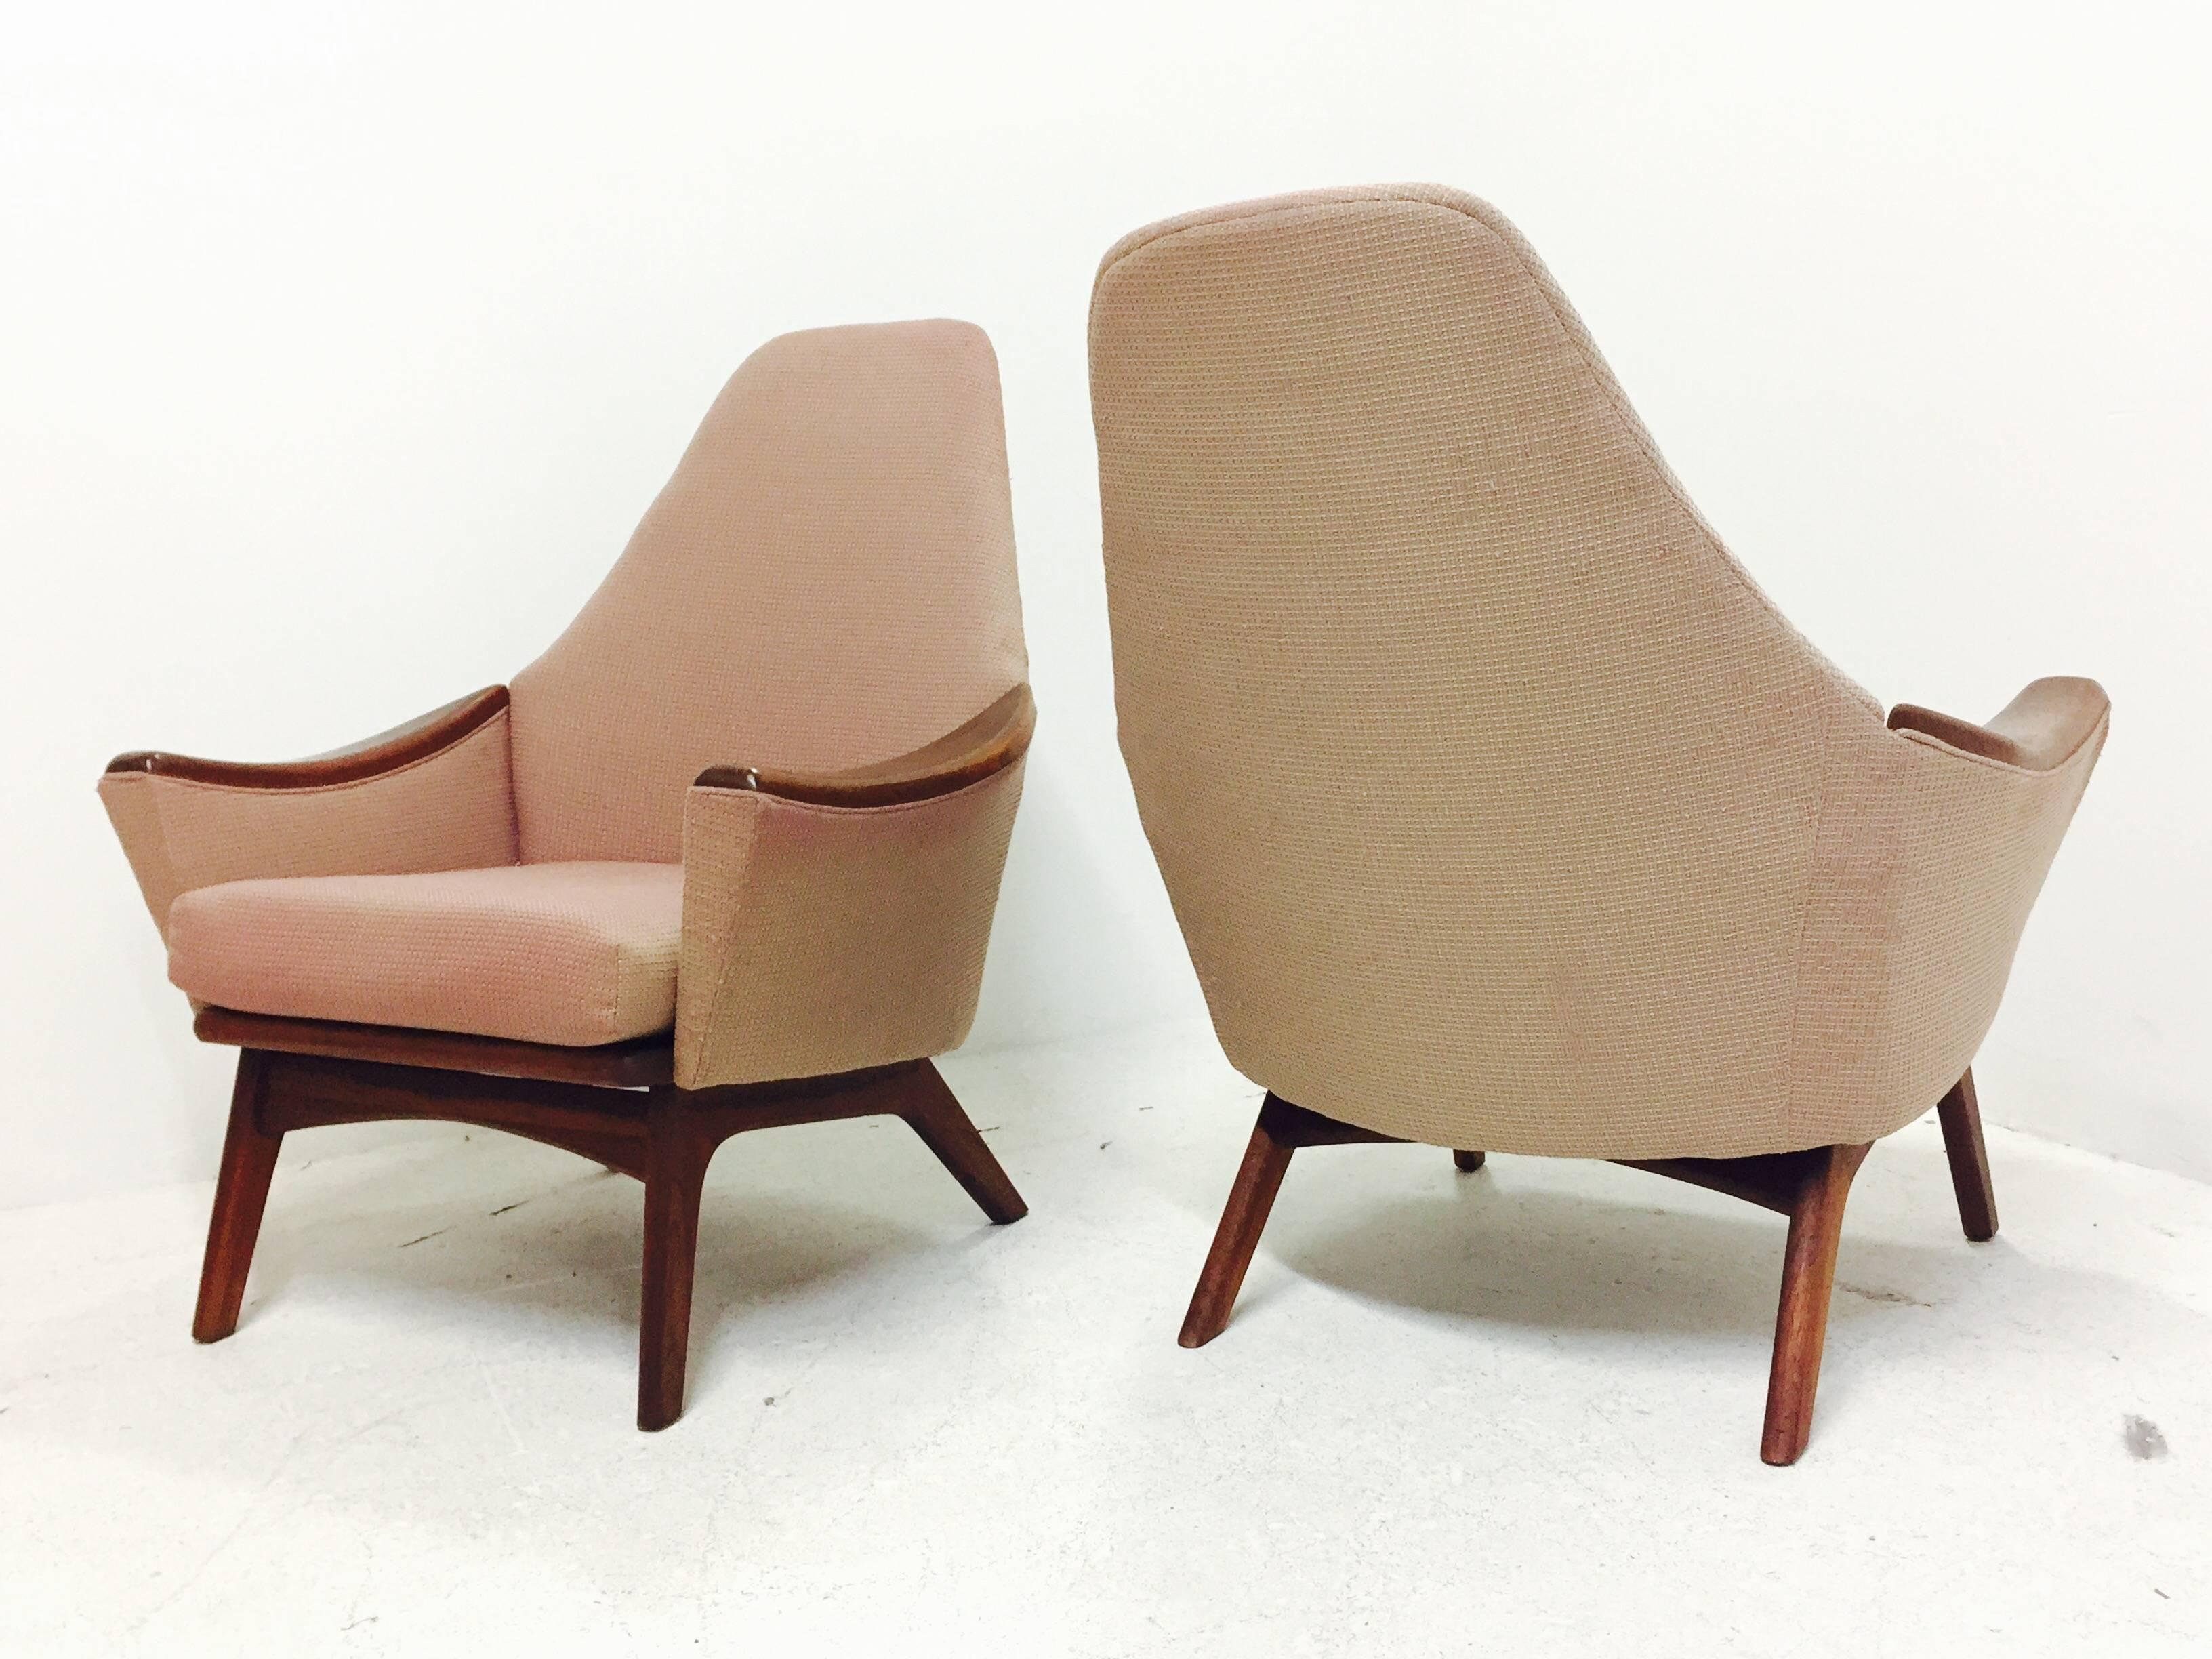 20th Century Pair of High Back Lounge Chairs by Adrian Pearsall for Craft Associates